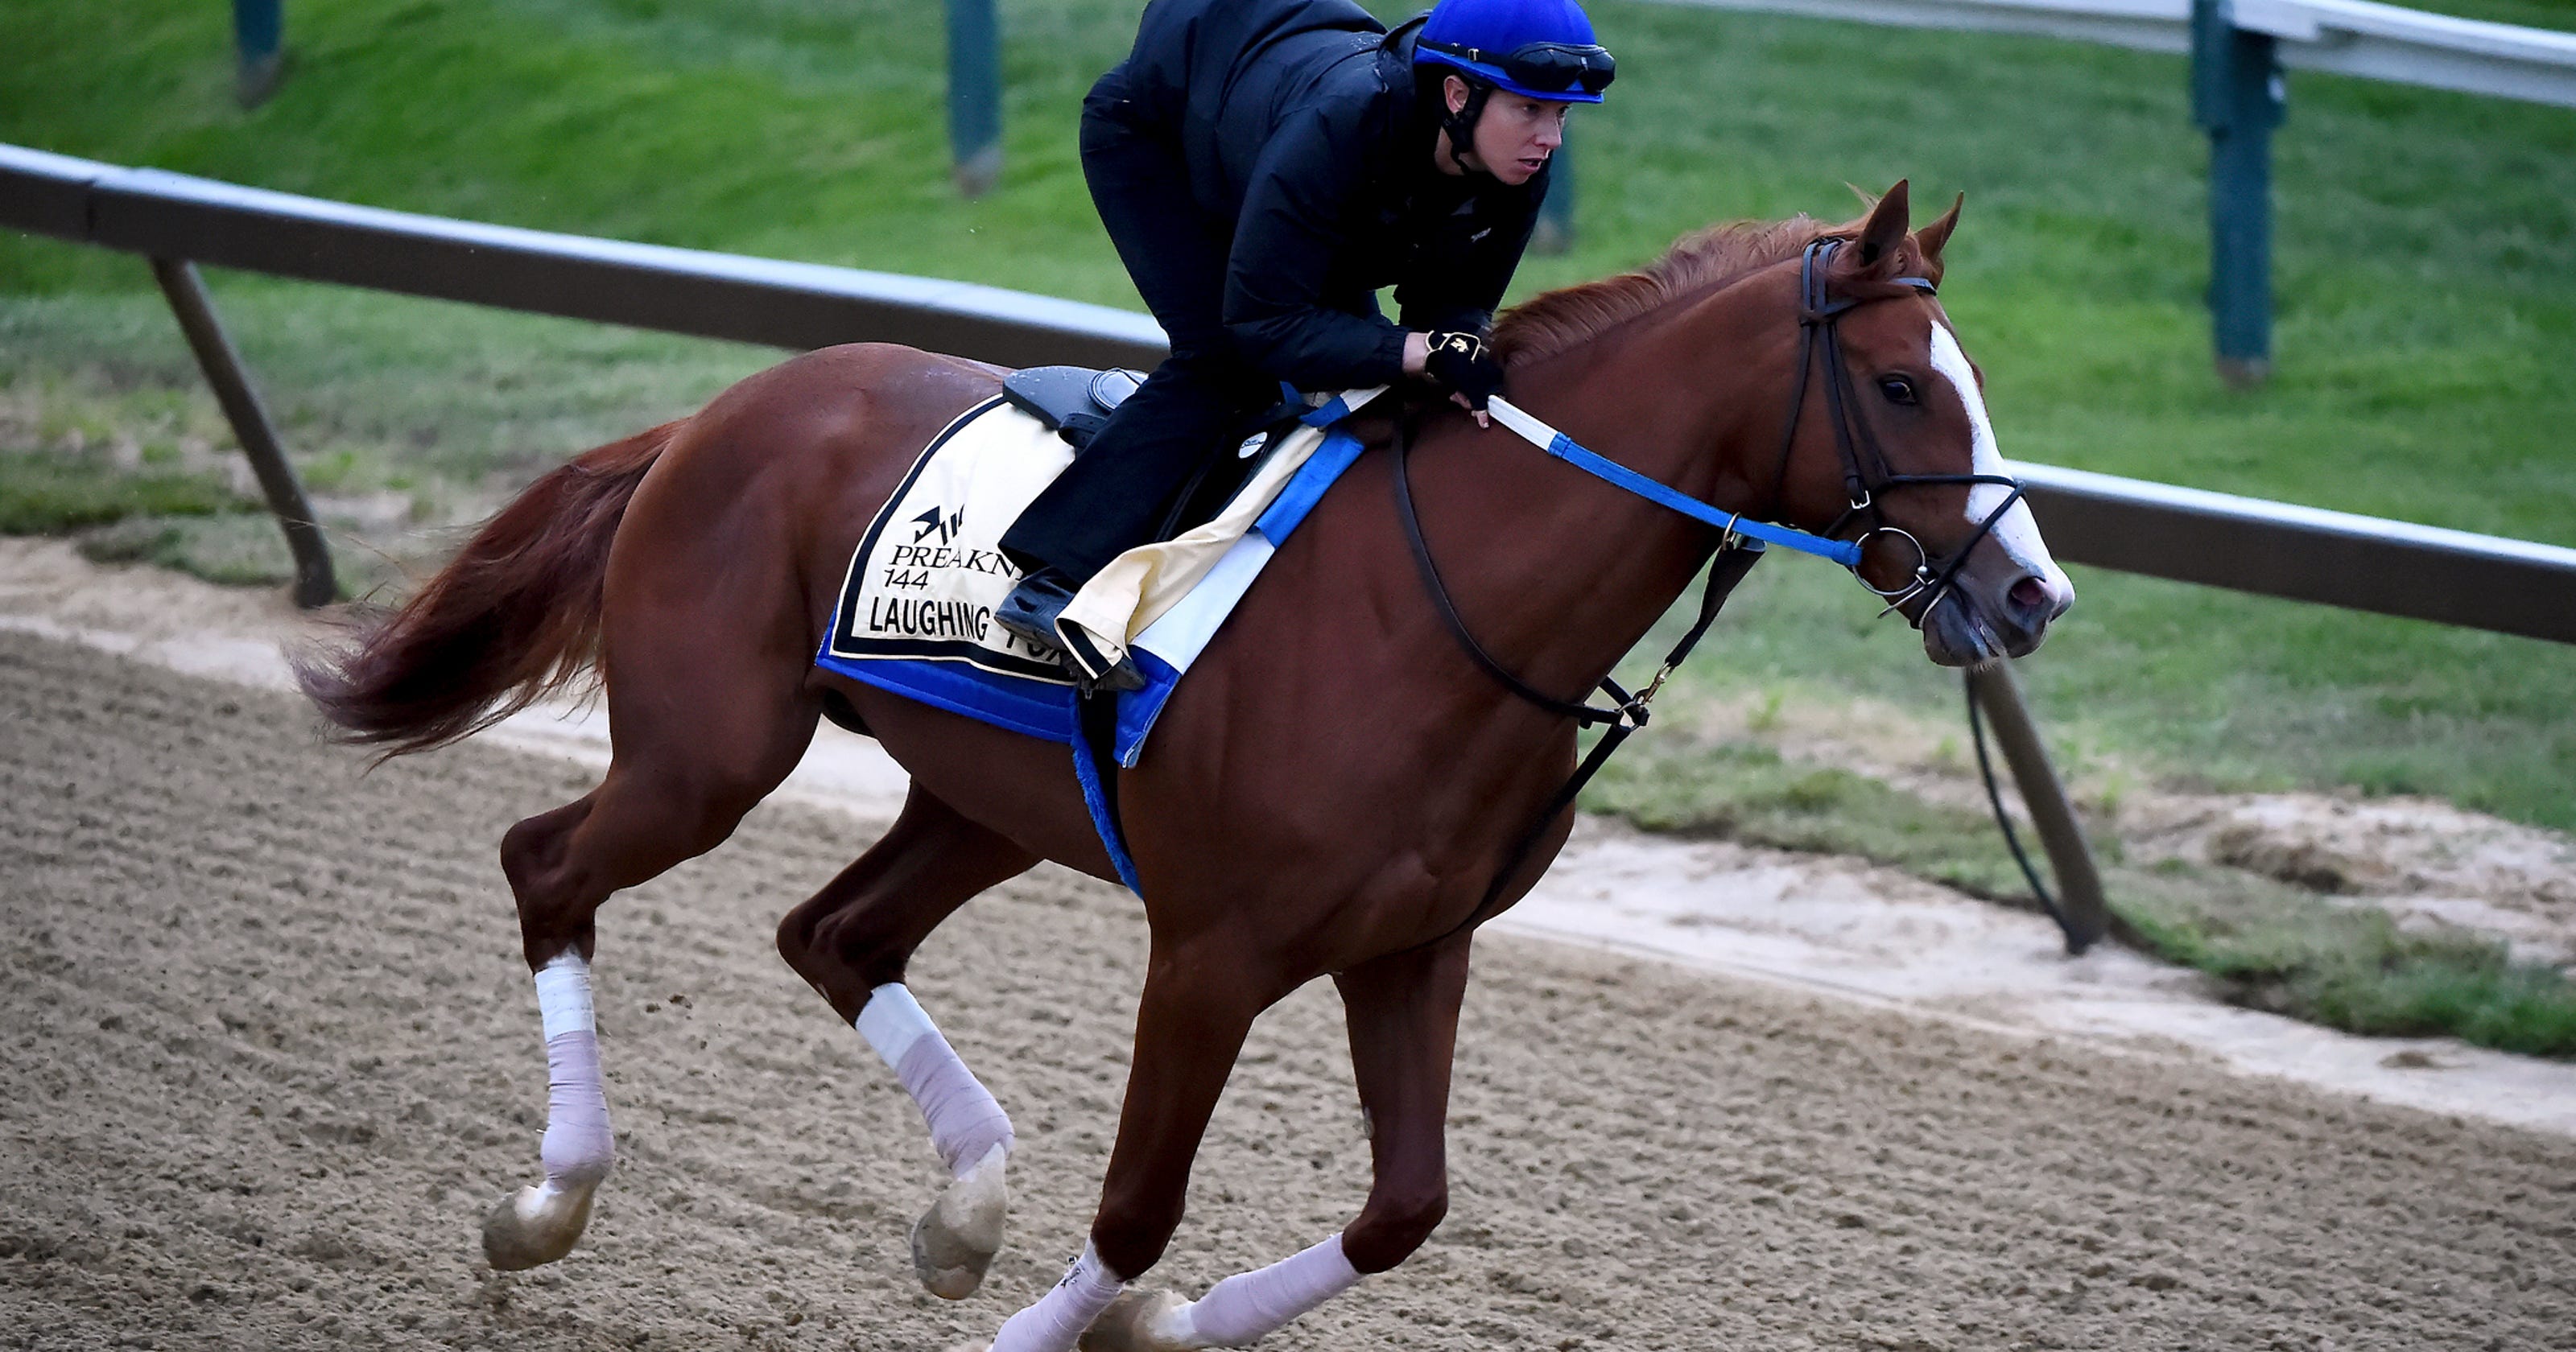 Preakness 2019 Post time, odds, horses and how to watch